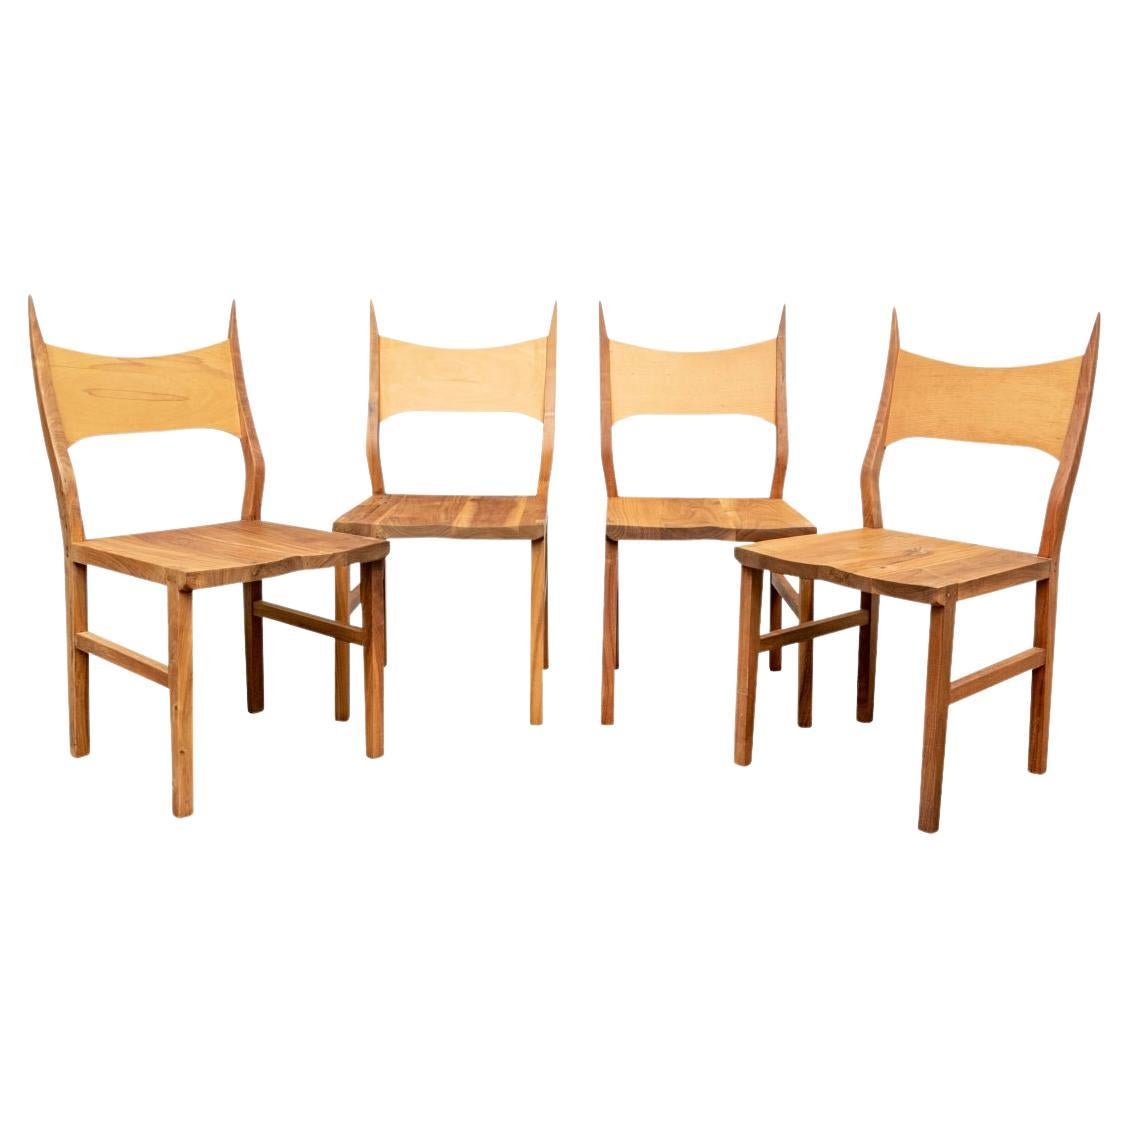 Set of Four Mixed Wood Side Chairs by Organic Modernism